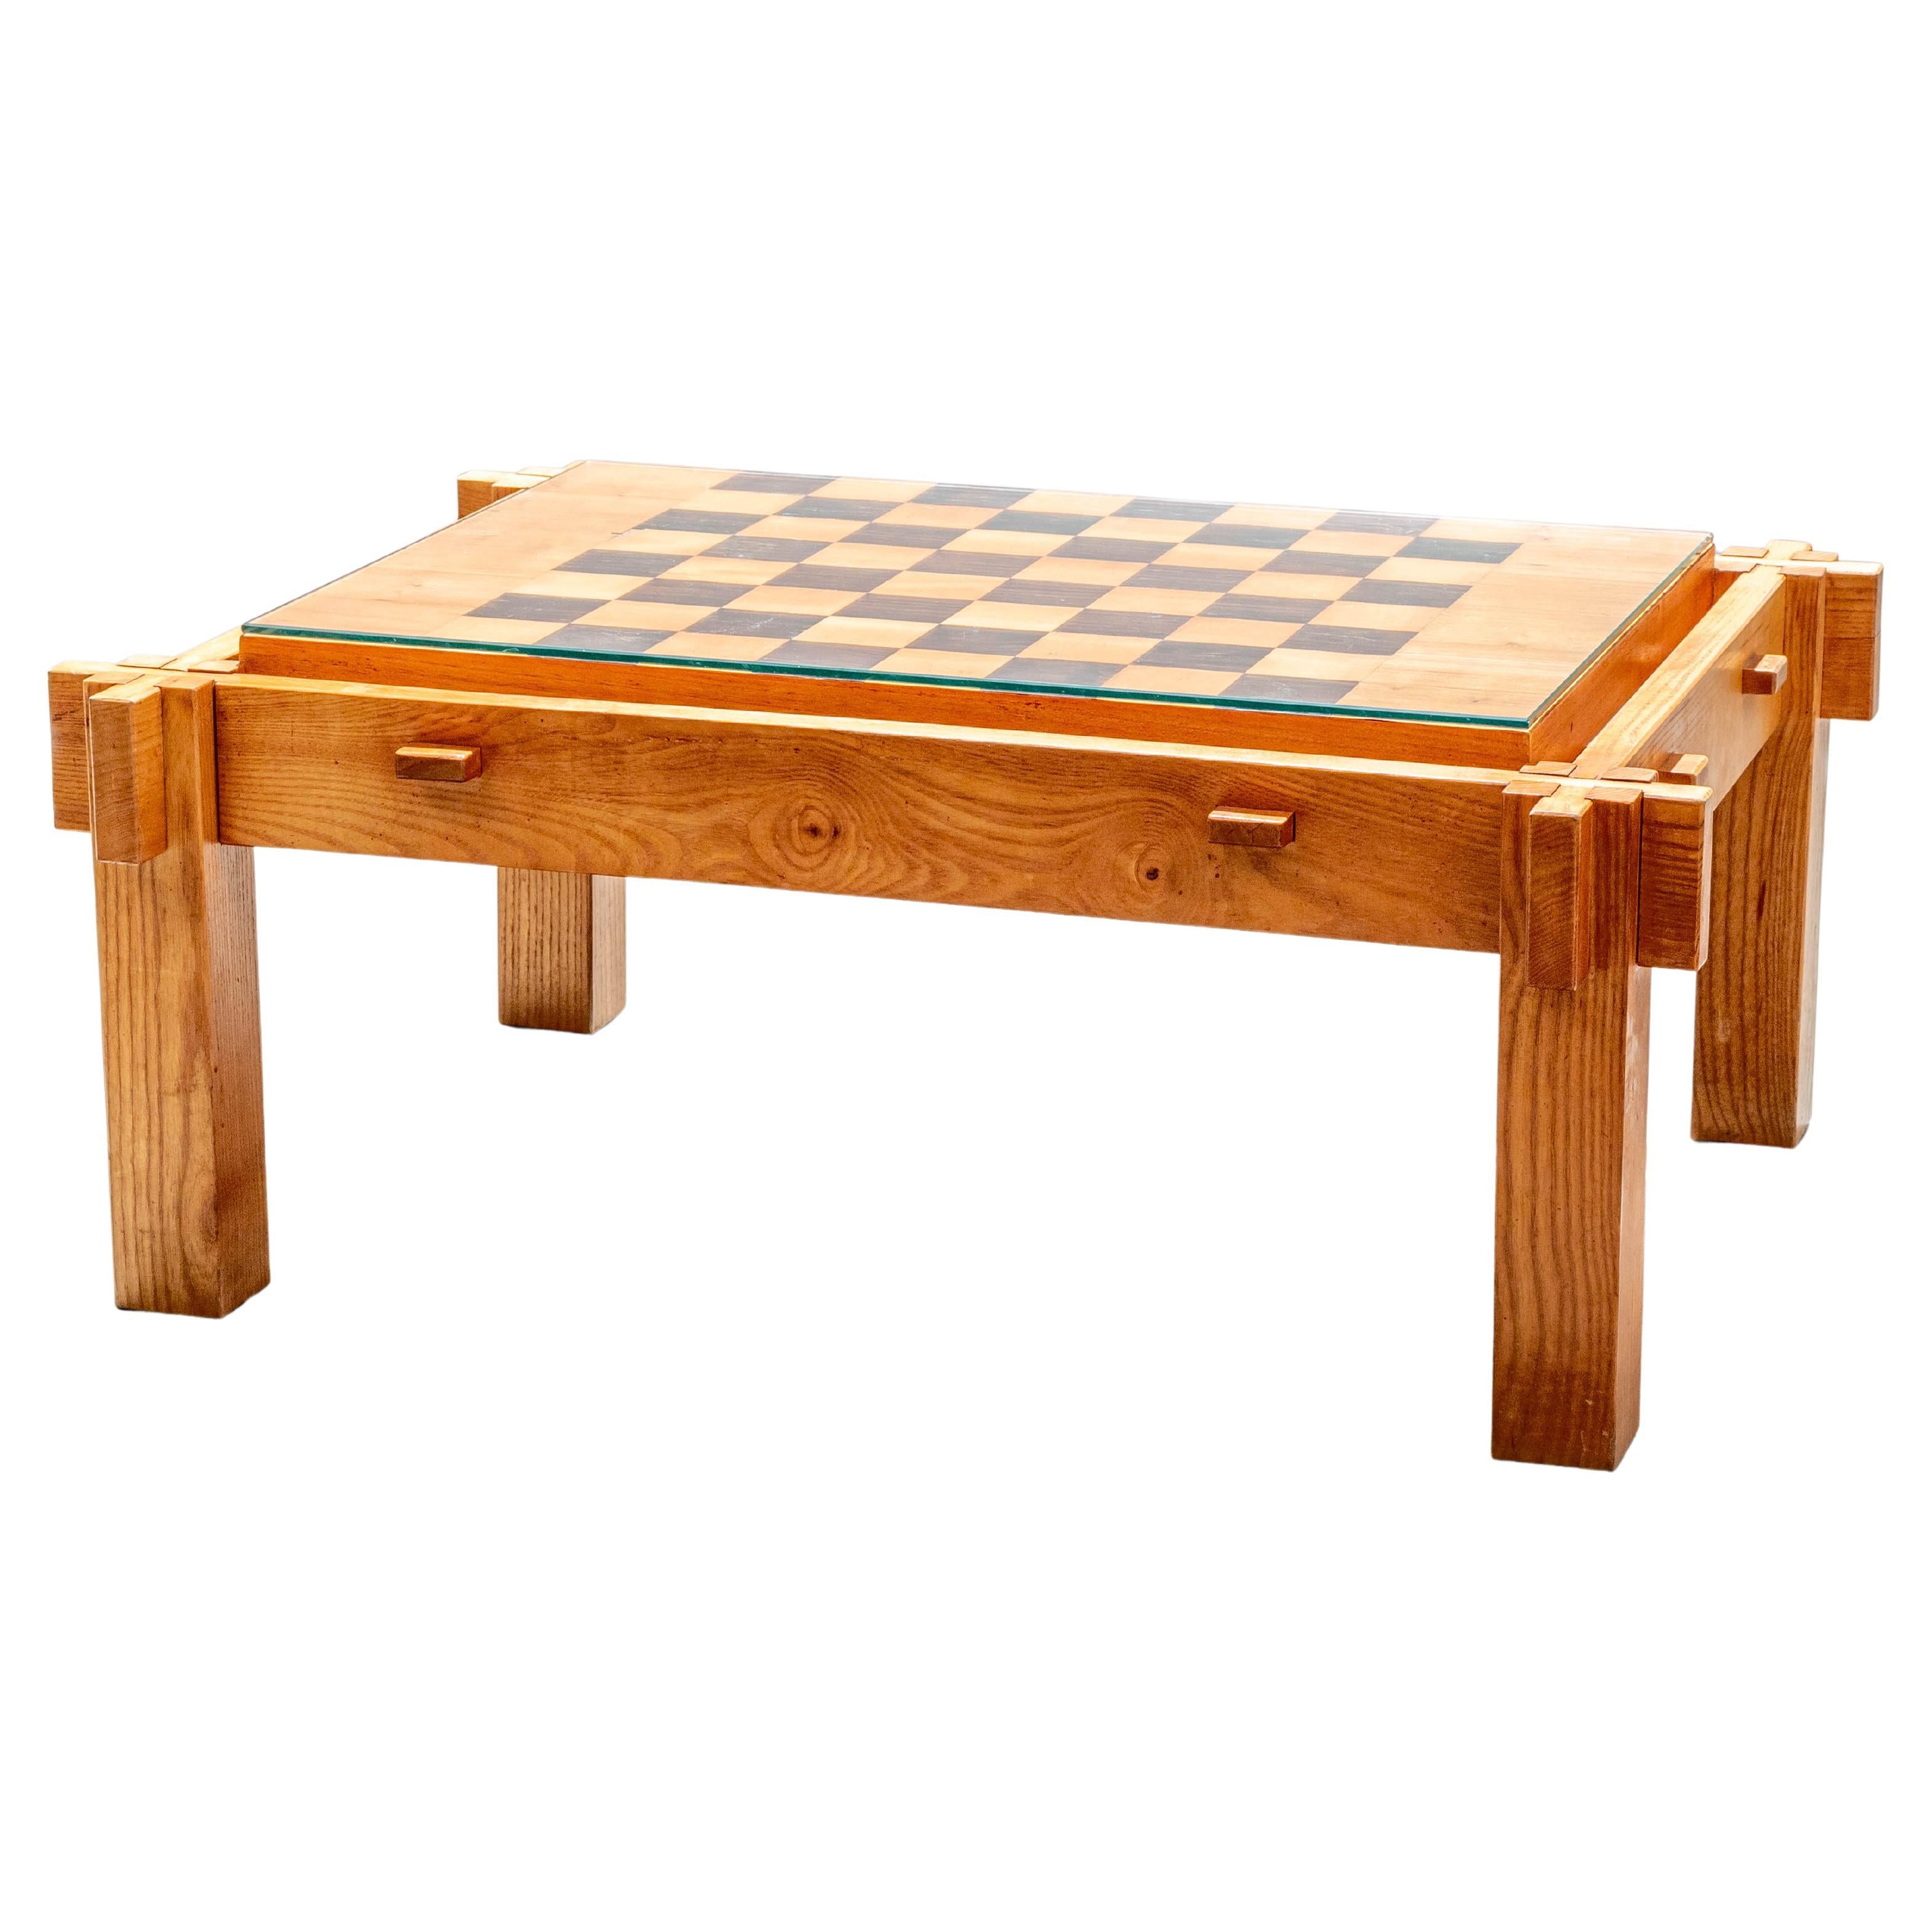 A low chess table in the style of Pierre Chapo with interesting corner corner construction. It's also a very heavy and stable (not unimportant) chess table in solid blonde elm. As always, chessboards give a special touch to the room mainly because